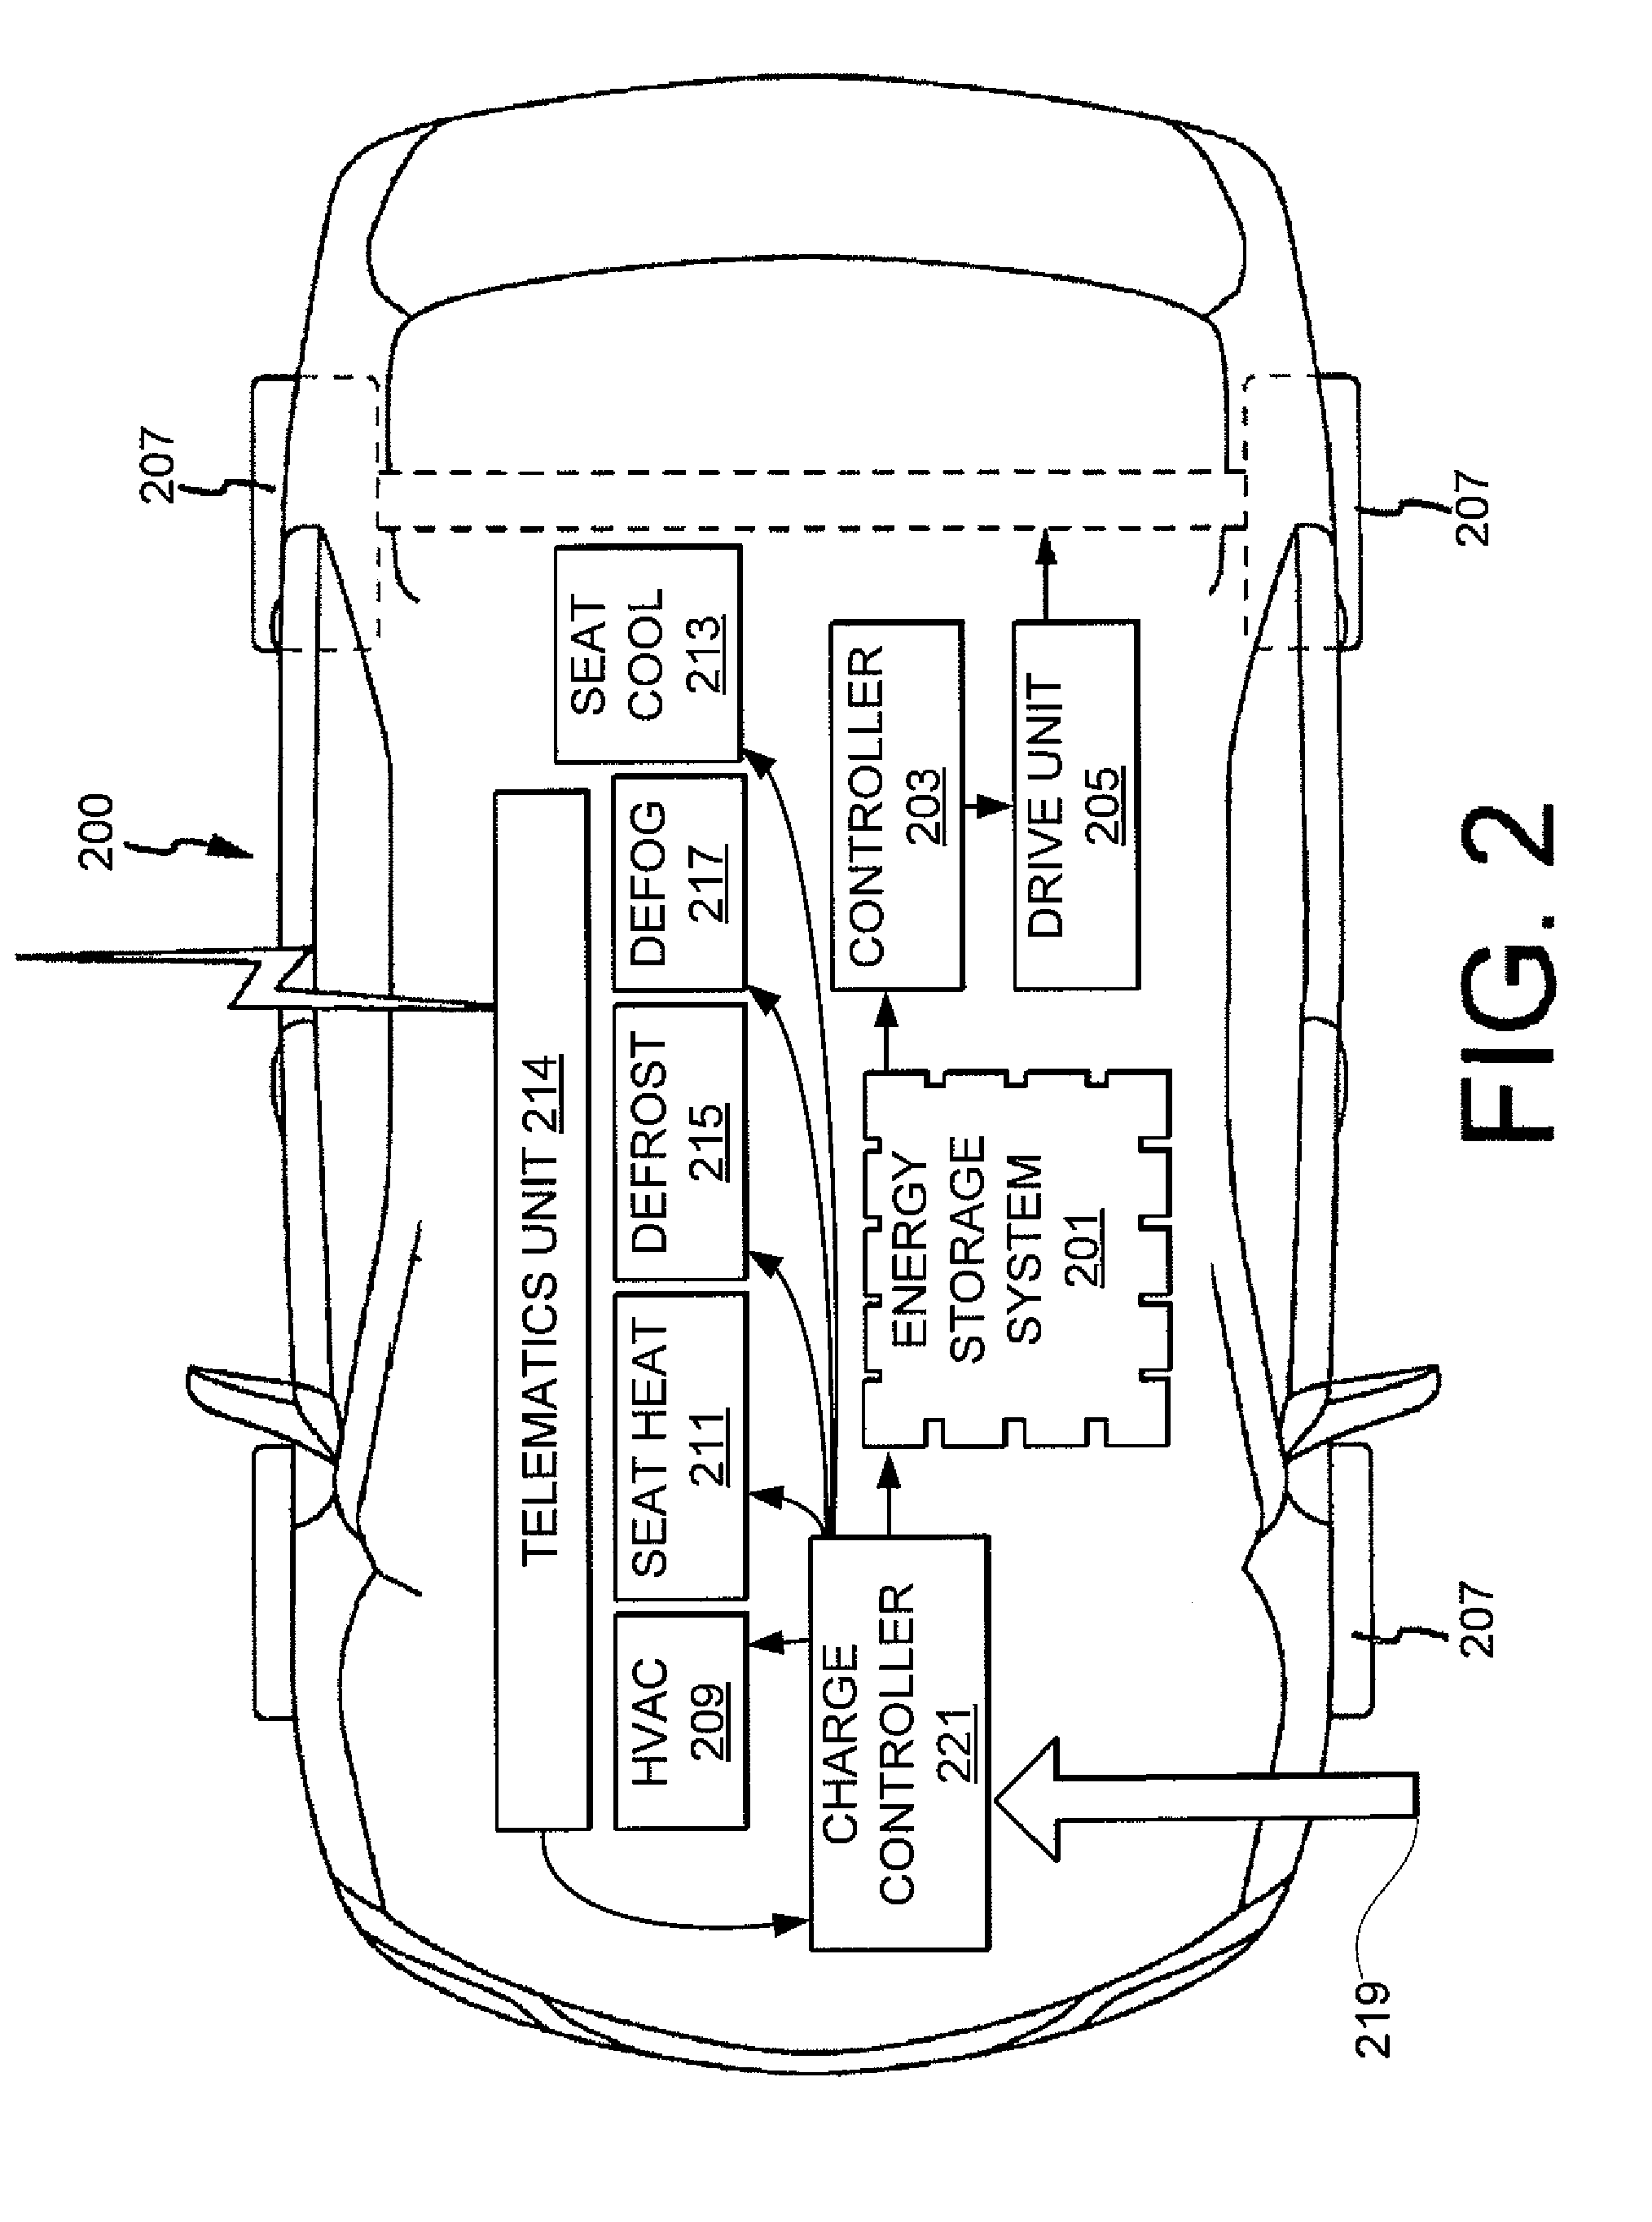 Remote trigger of an alternate energy source to power a vehicle system